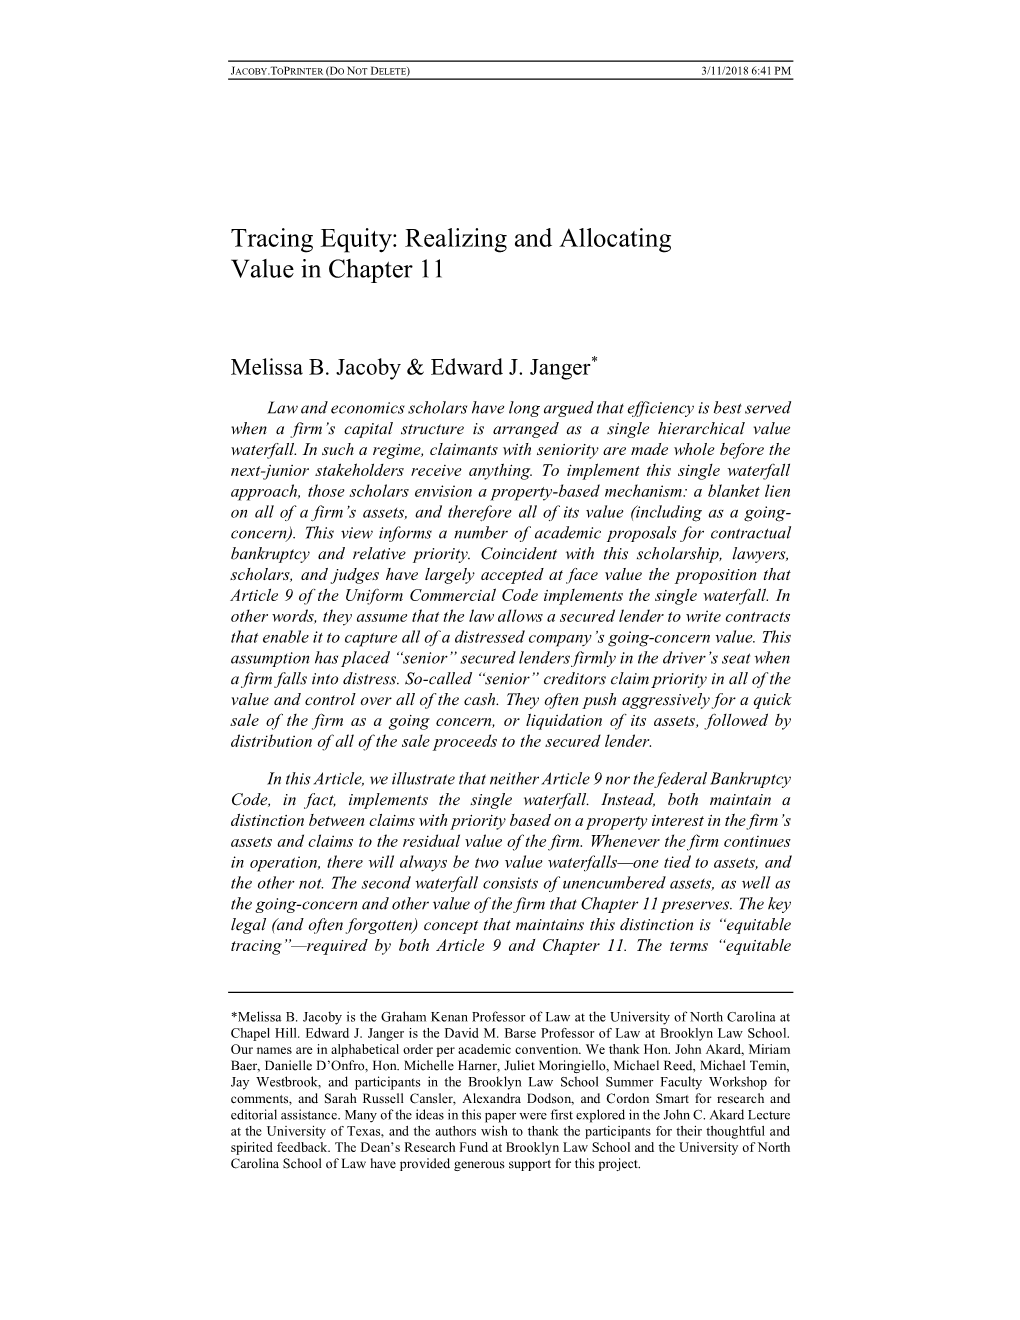 Tracing Equity: Realizing and Allocating Value in Chapter 11